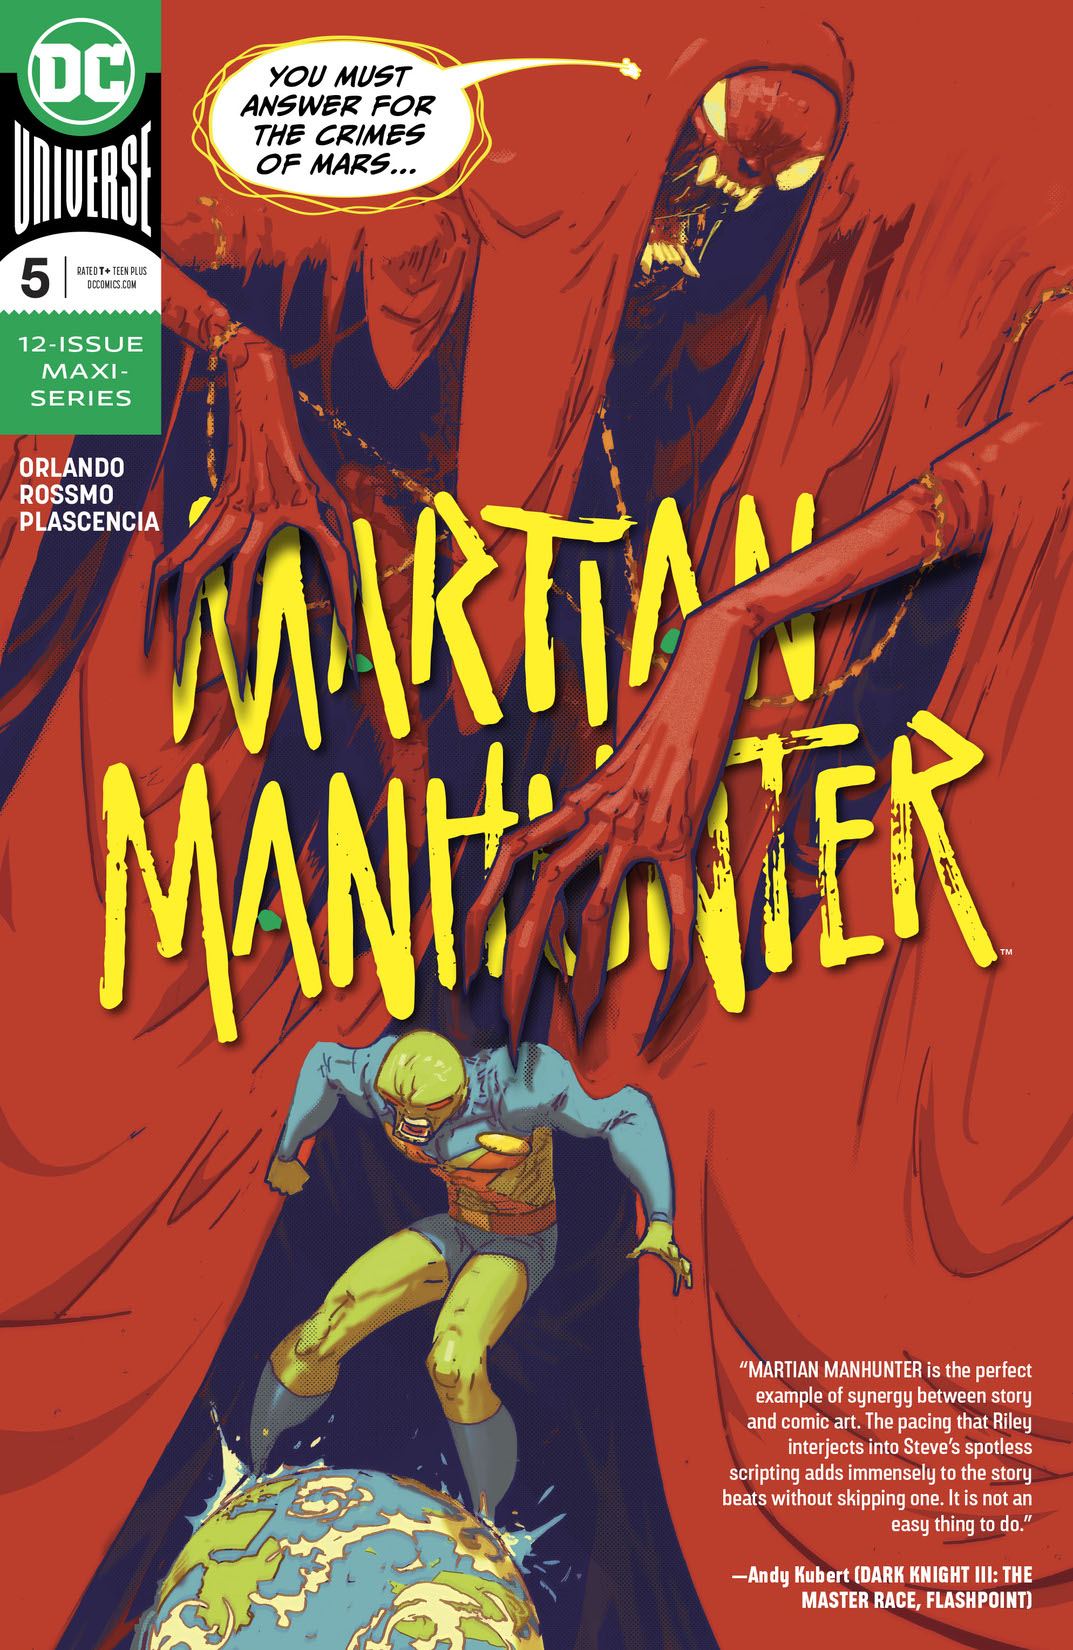 Martian Manhunter (2018-2020) #5 preview images